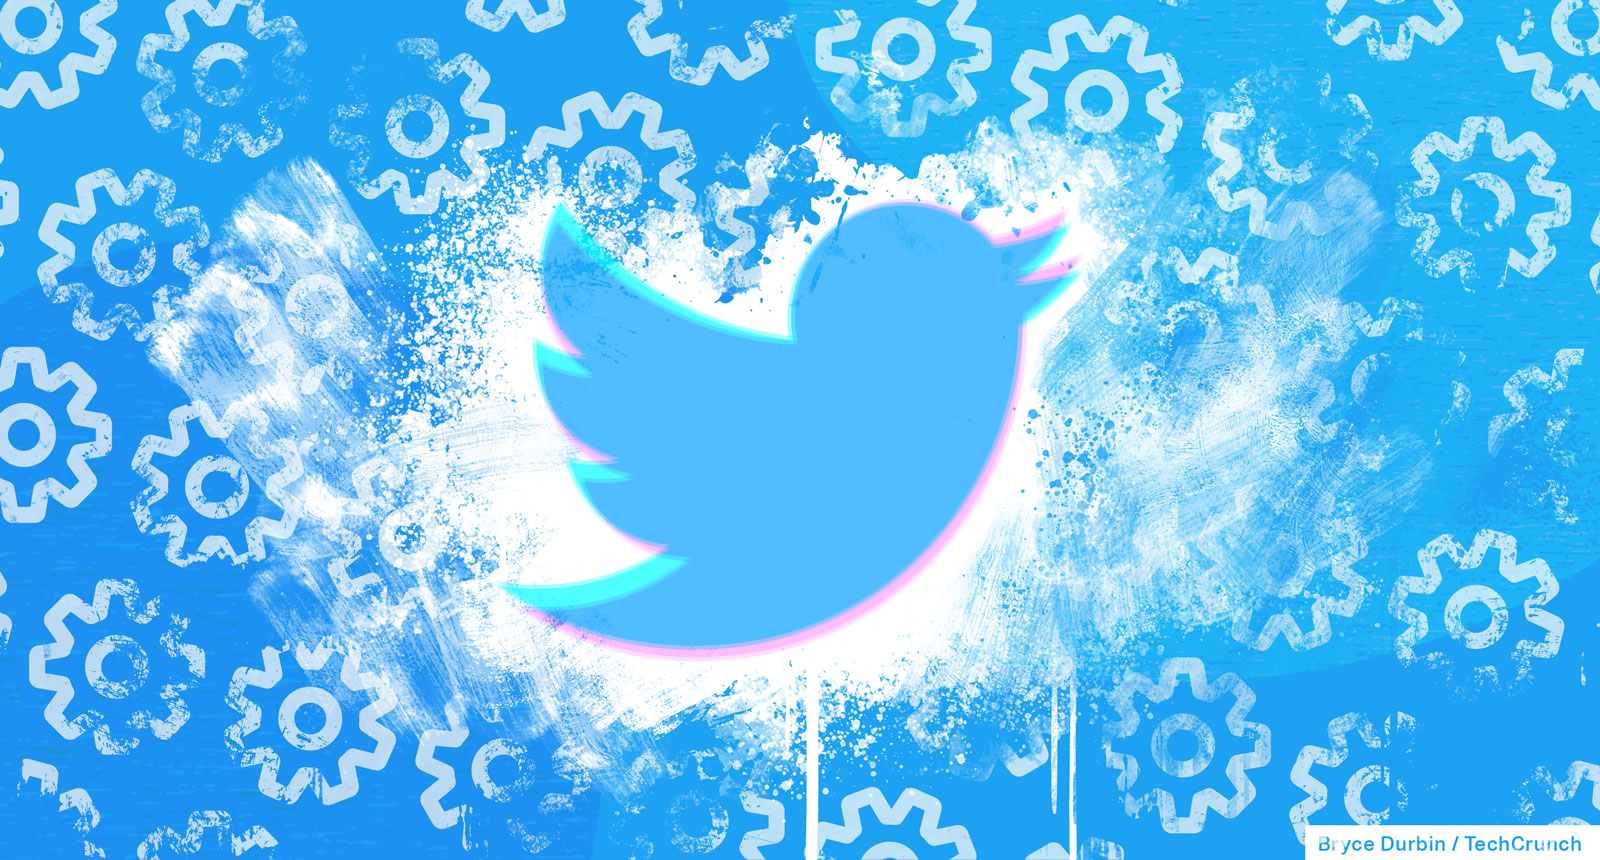 Twitter introduces a new $5,000 per month API tier